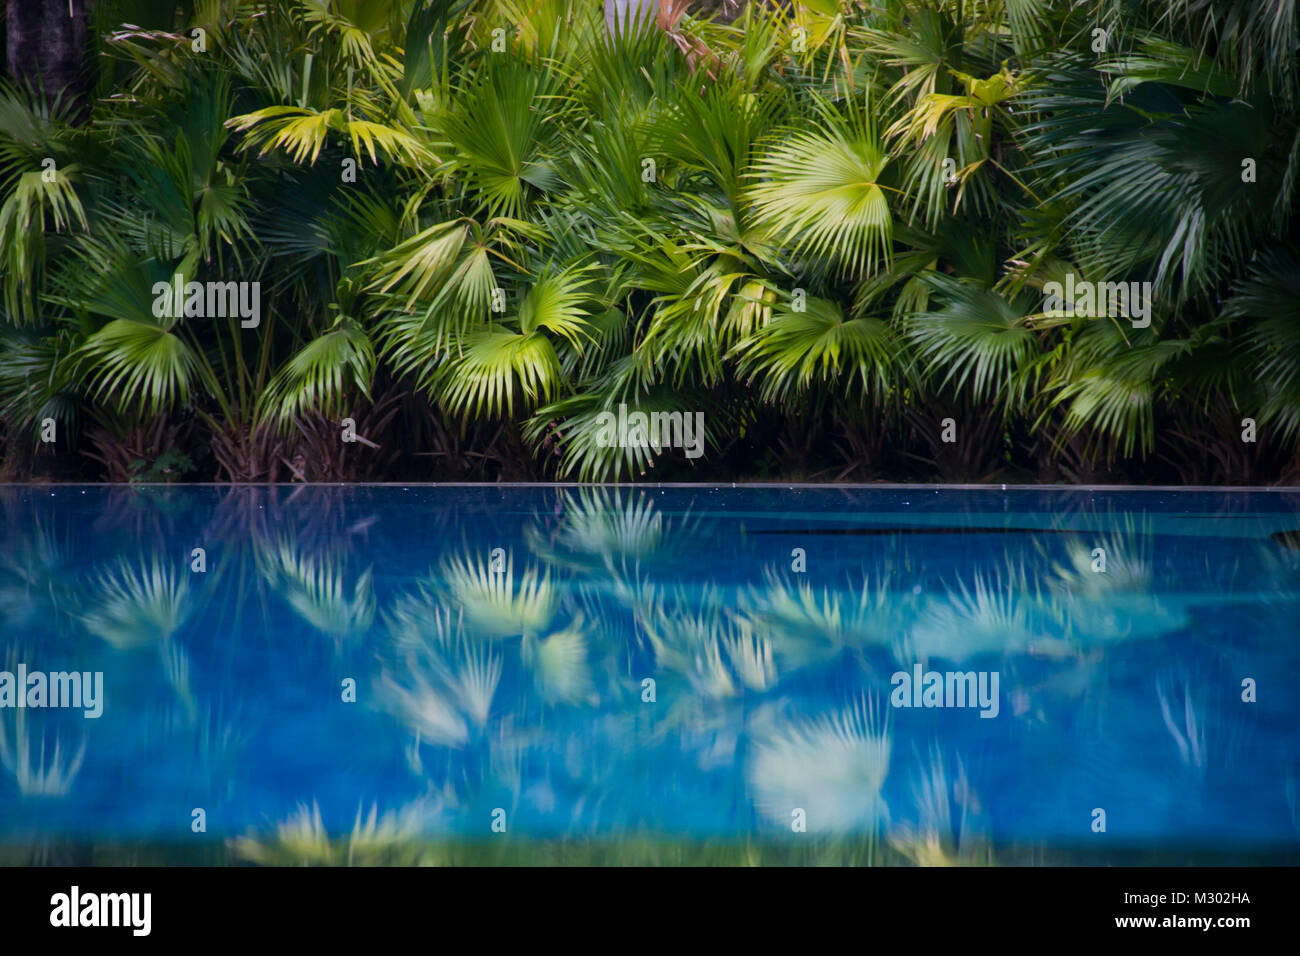 Green palm trees line a blue swimming pool at an island vacation spot in Asia. Stock Photo